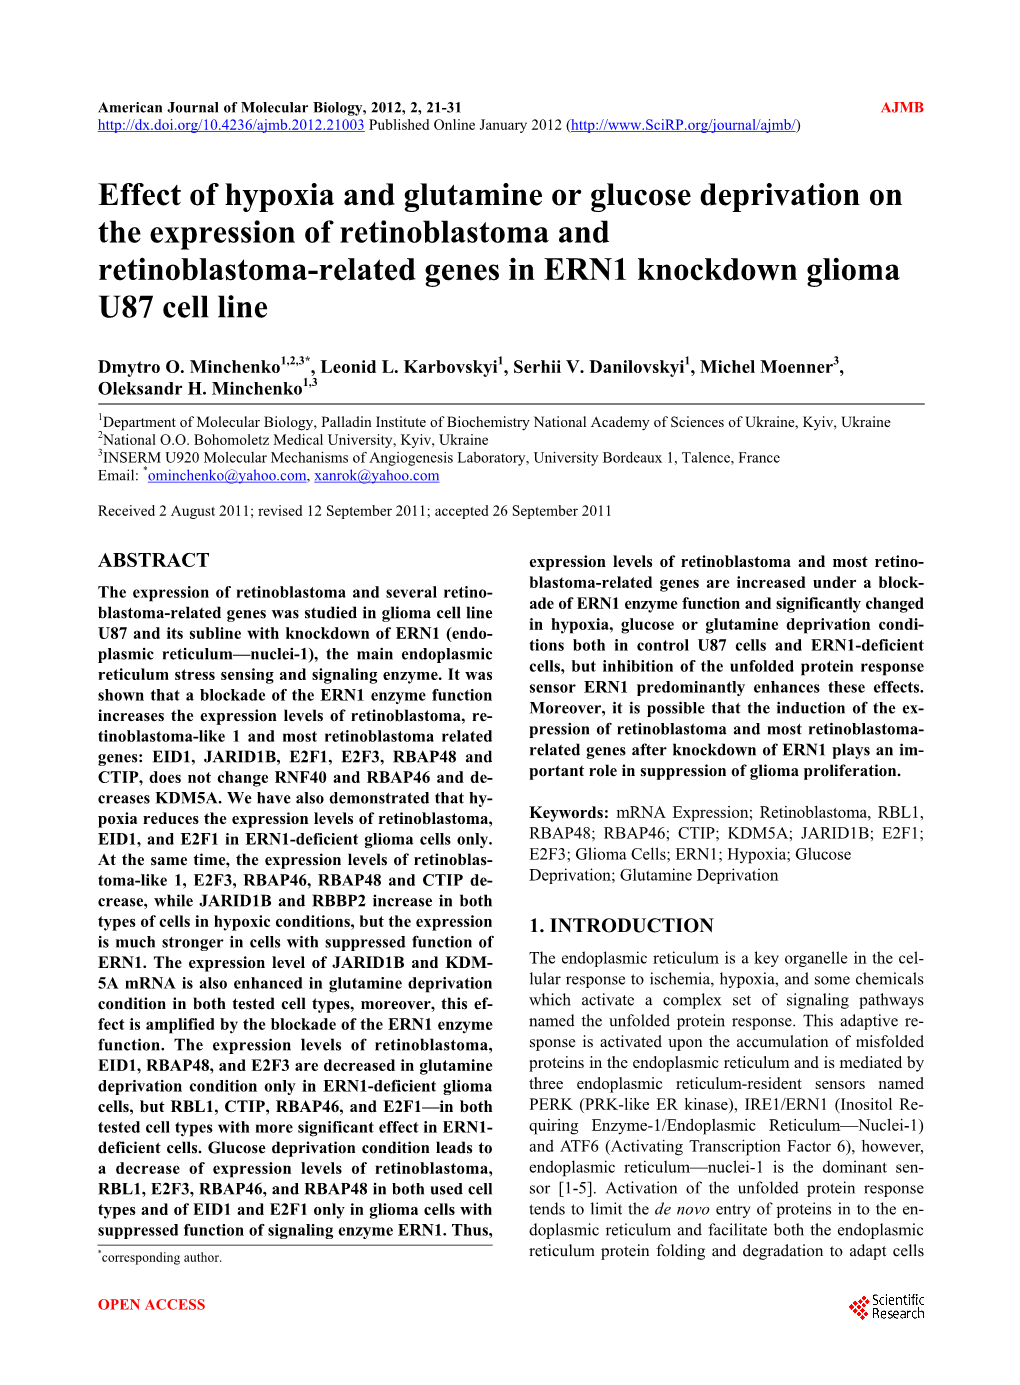 Effect of Hypoxia and Glutamine Or Glucose Deprivation on the Expression of Retinoblastoma and Retinoblastoma-Related Genes in ERN1 Knockdown Glioma U87 Cell Line